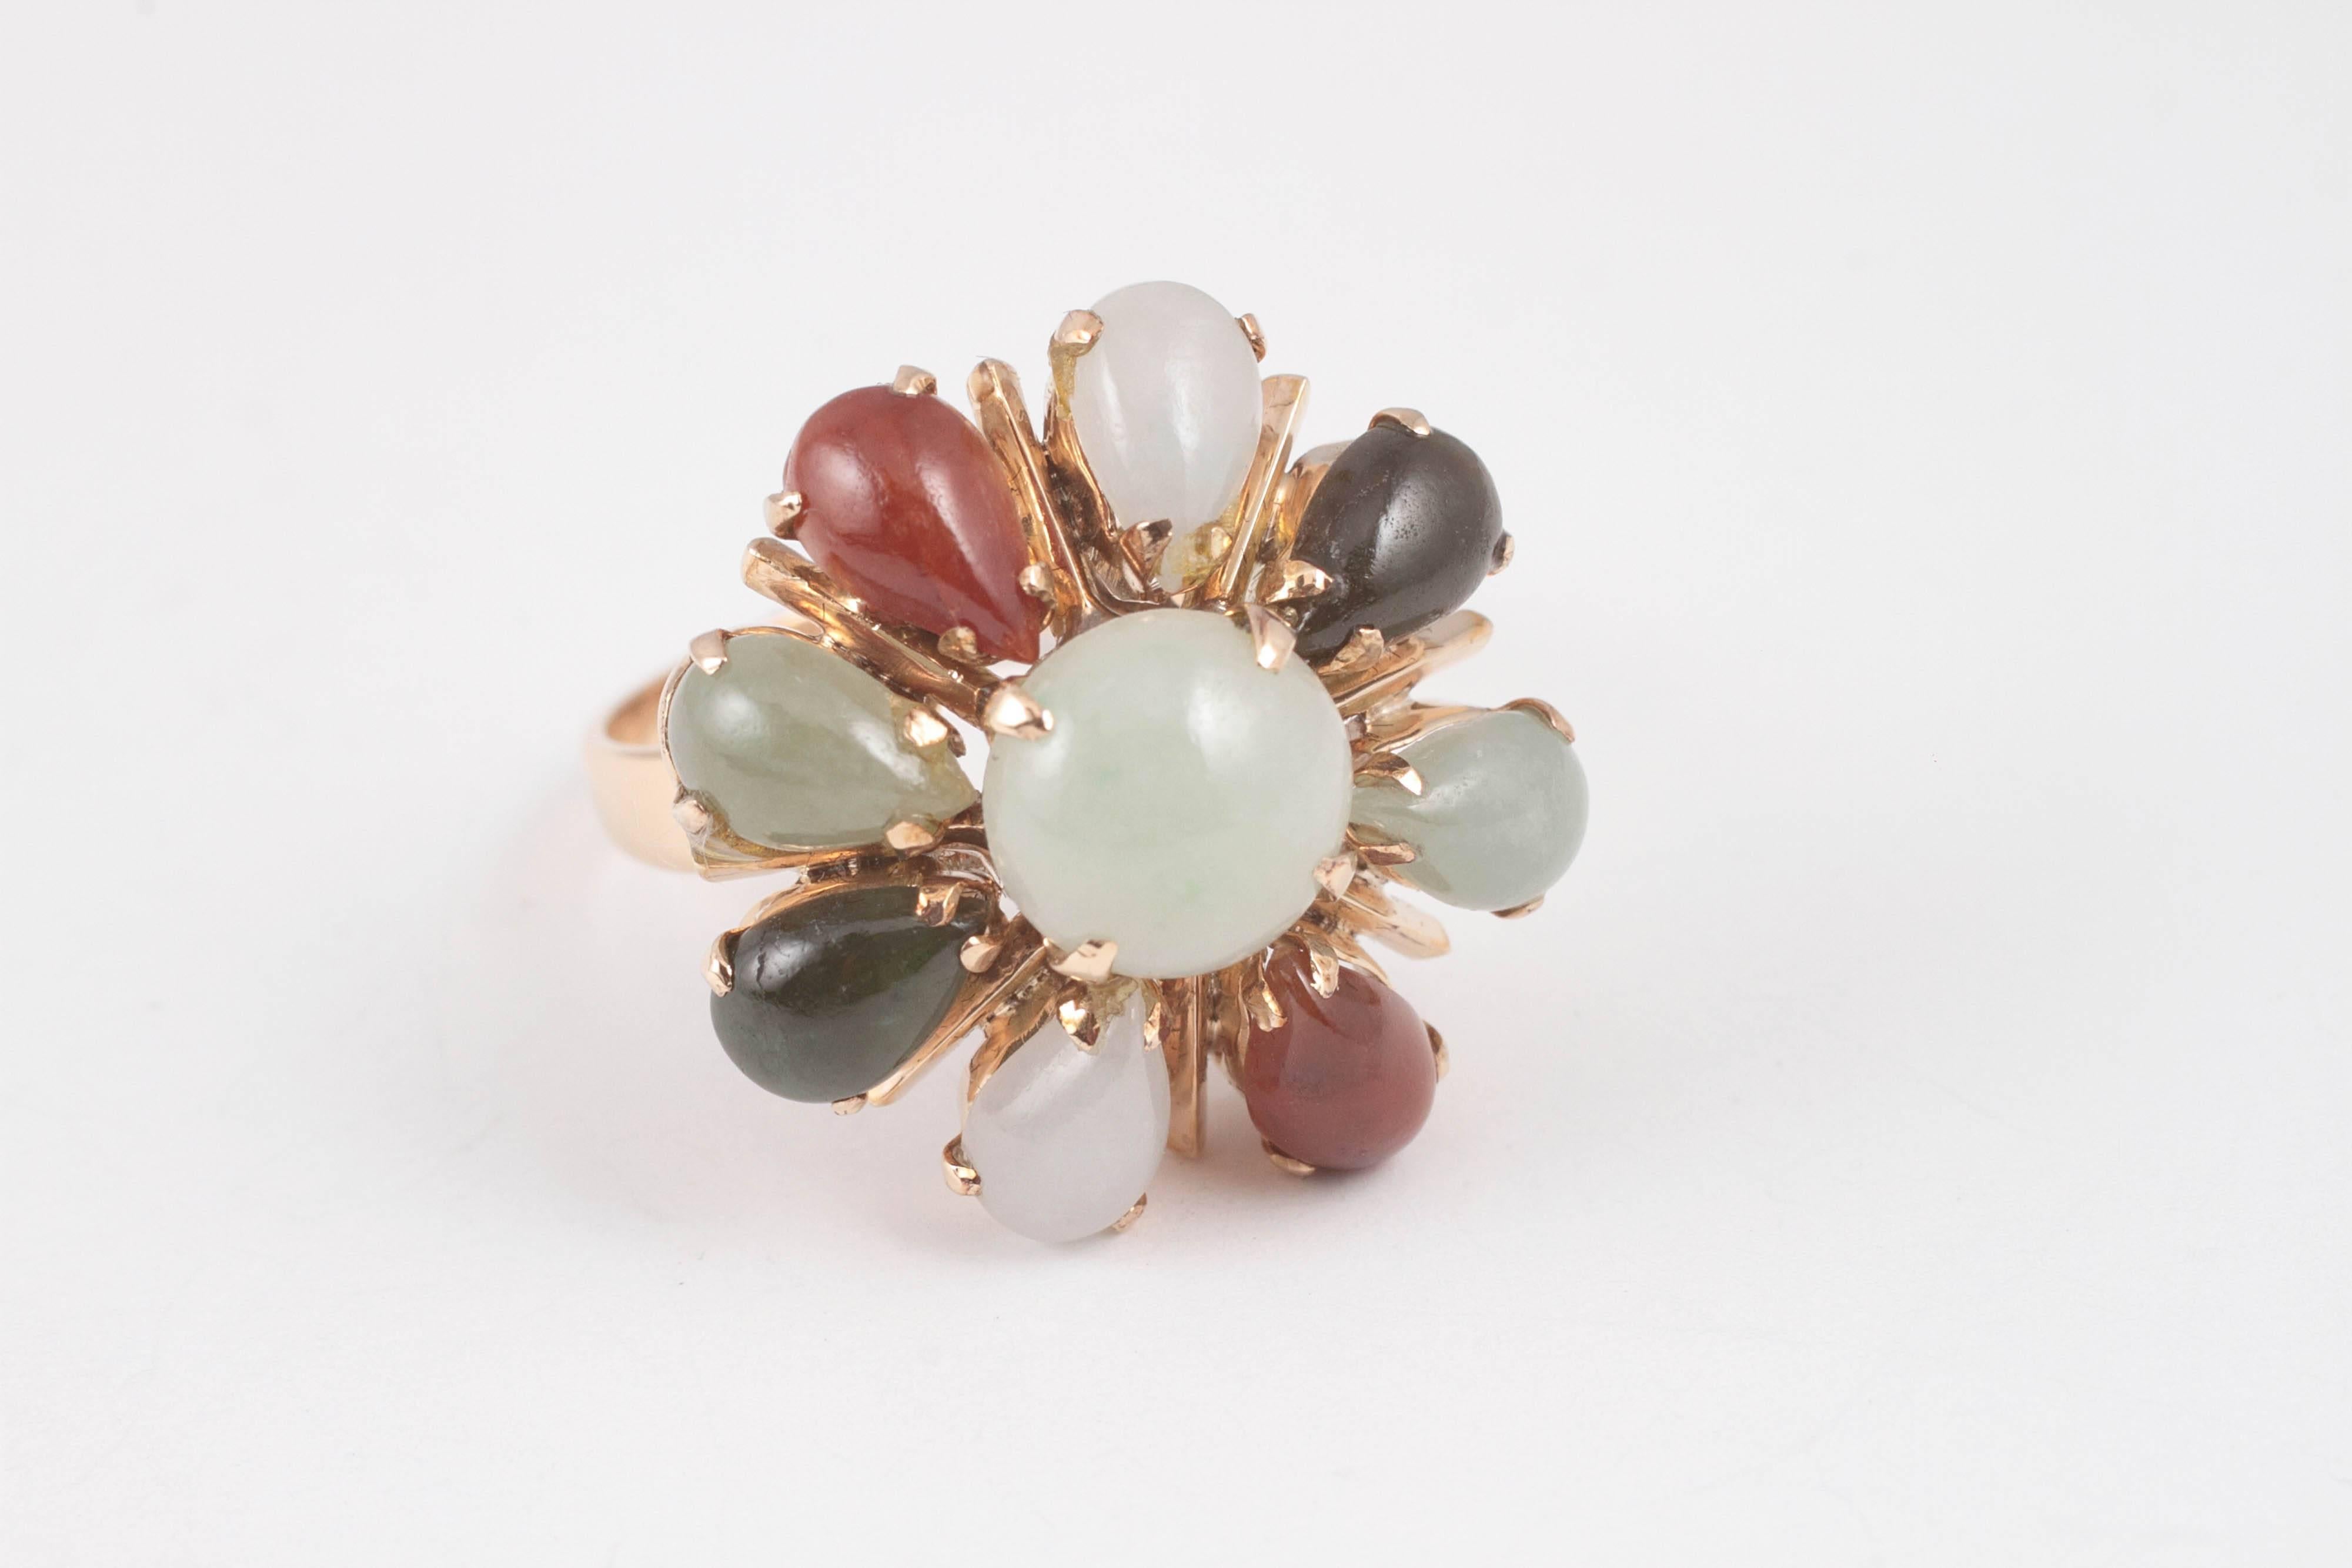 Commonly called a "harem" ring - fun look from the 1950's!  Size 8.25